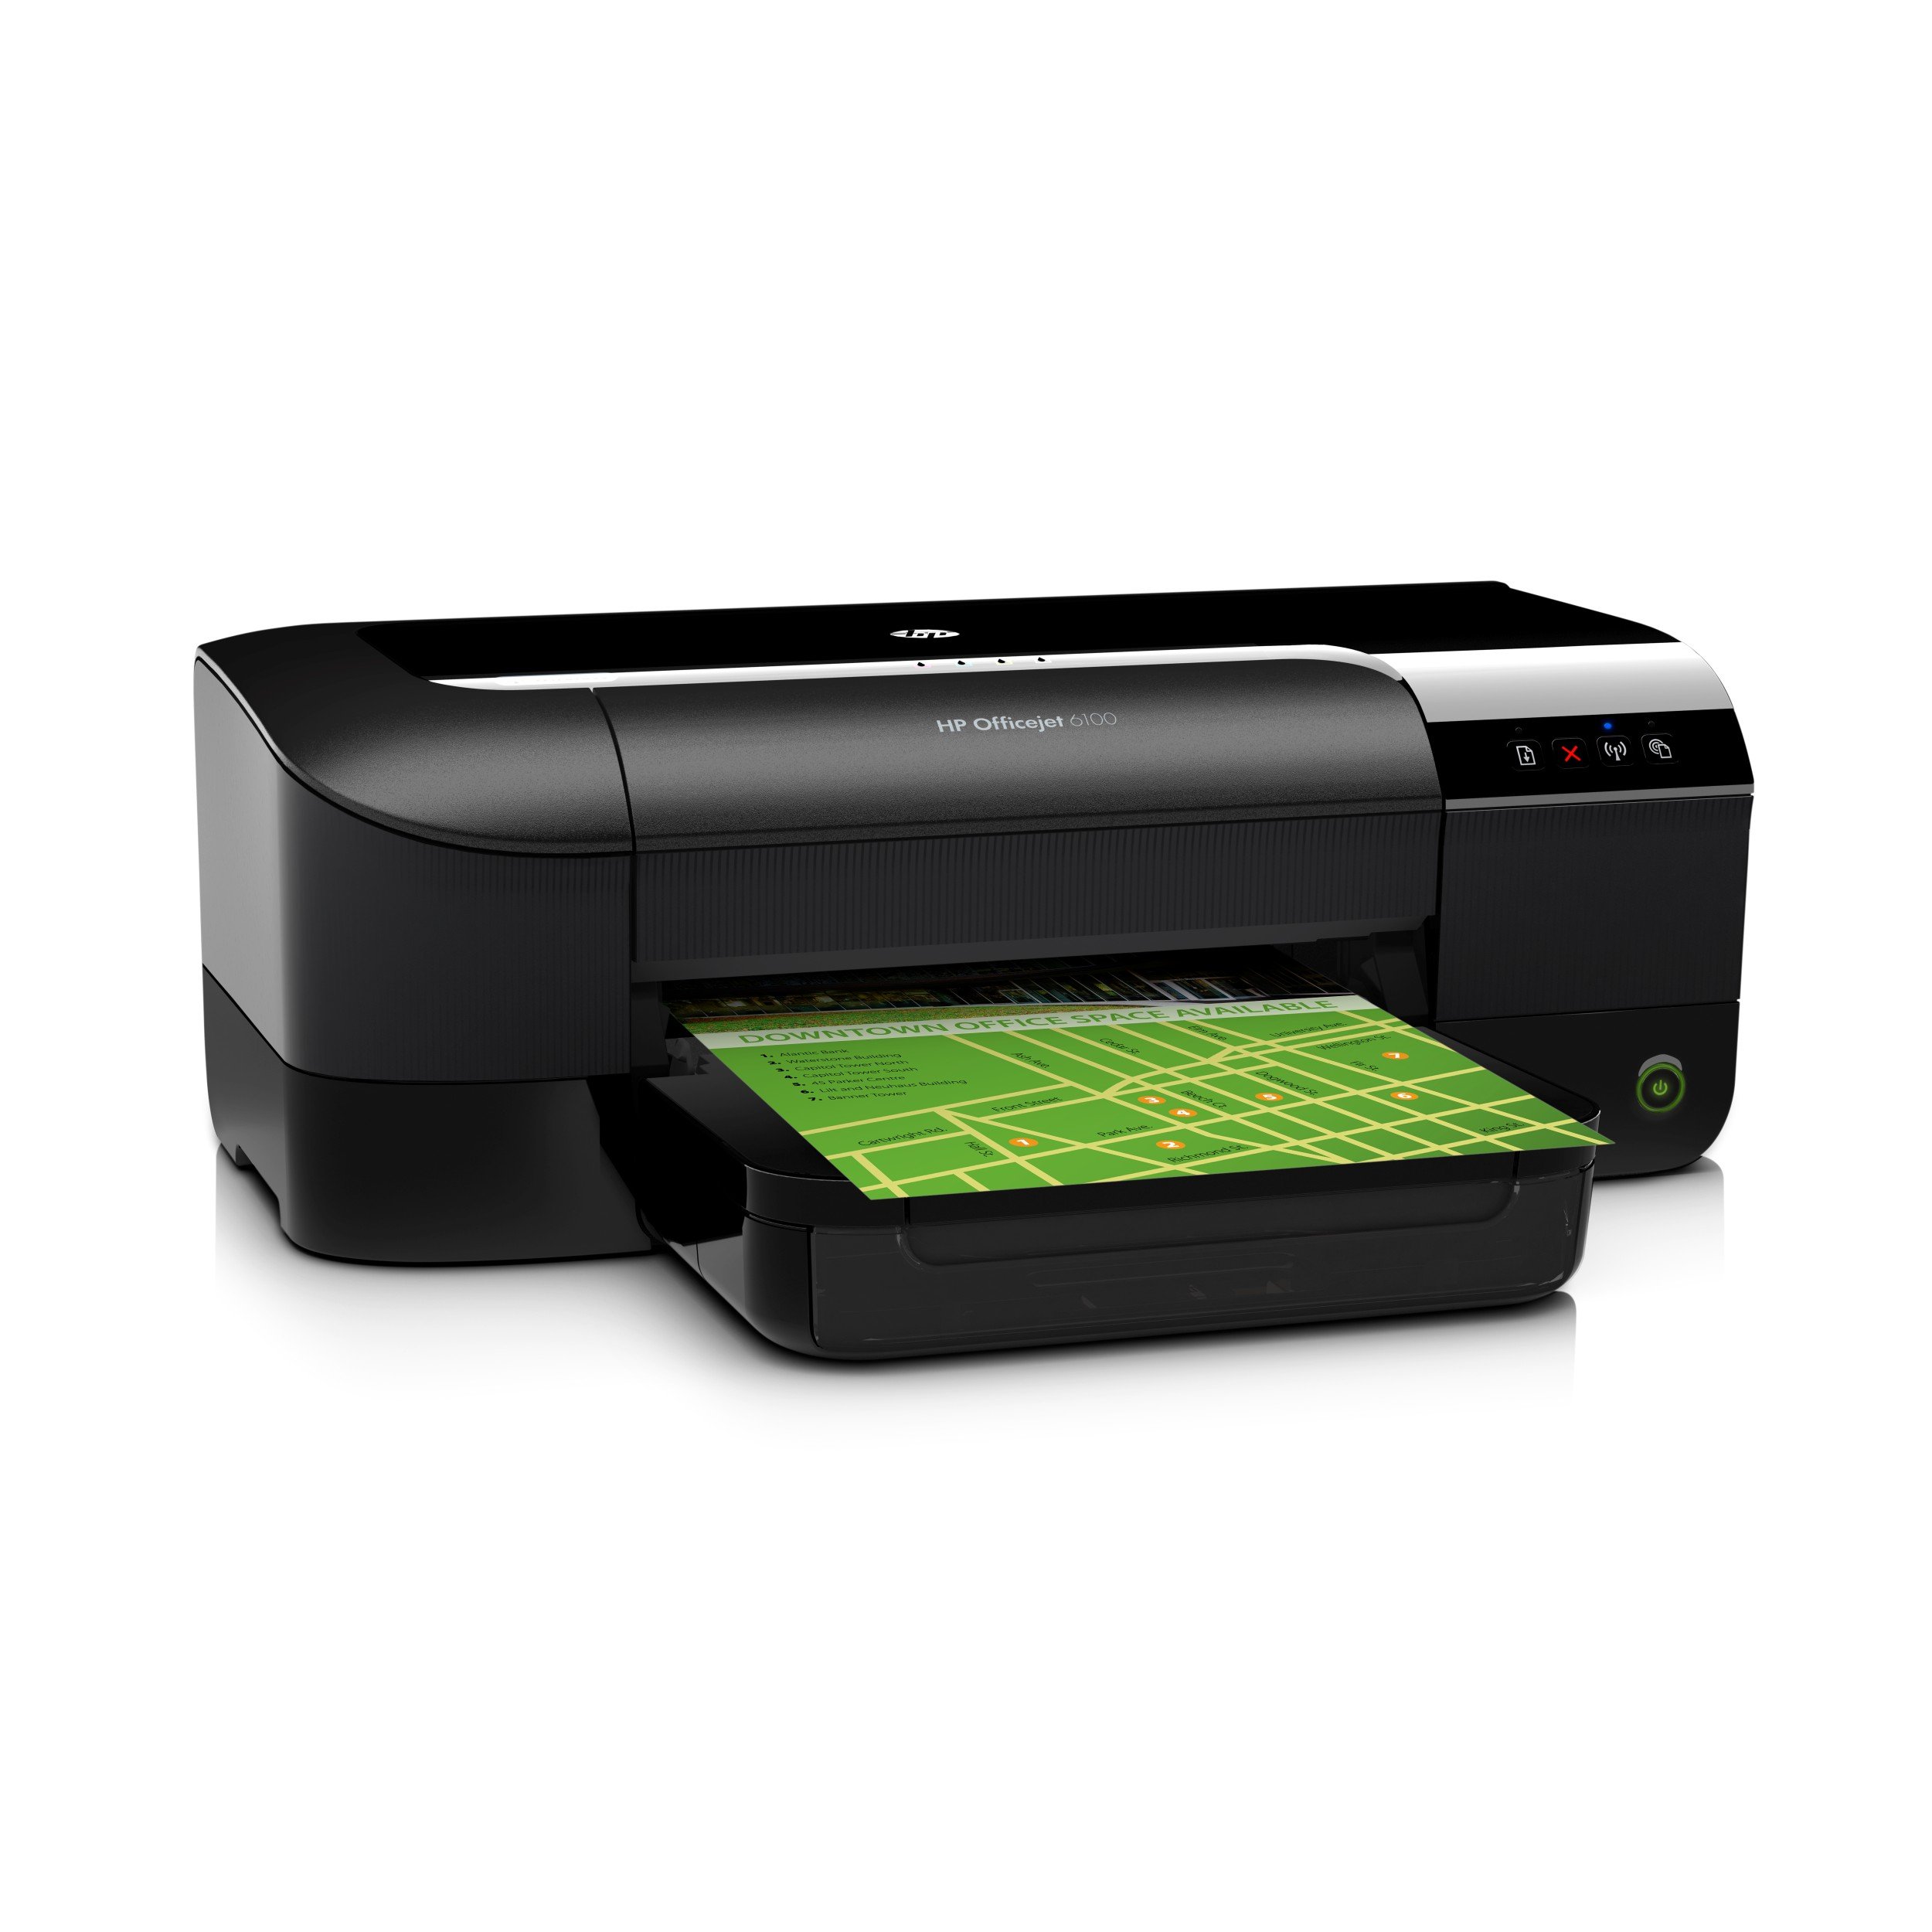 Officejet 6100 All-in-One Printer series